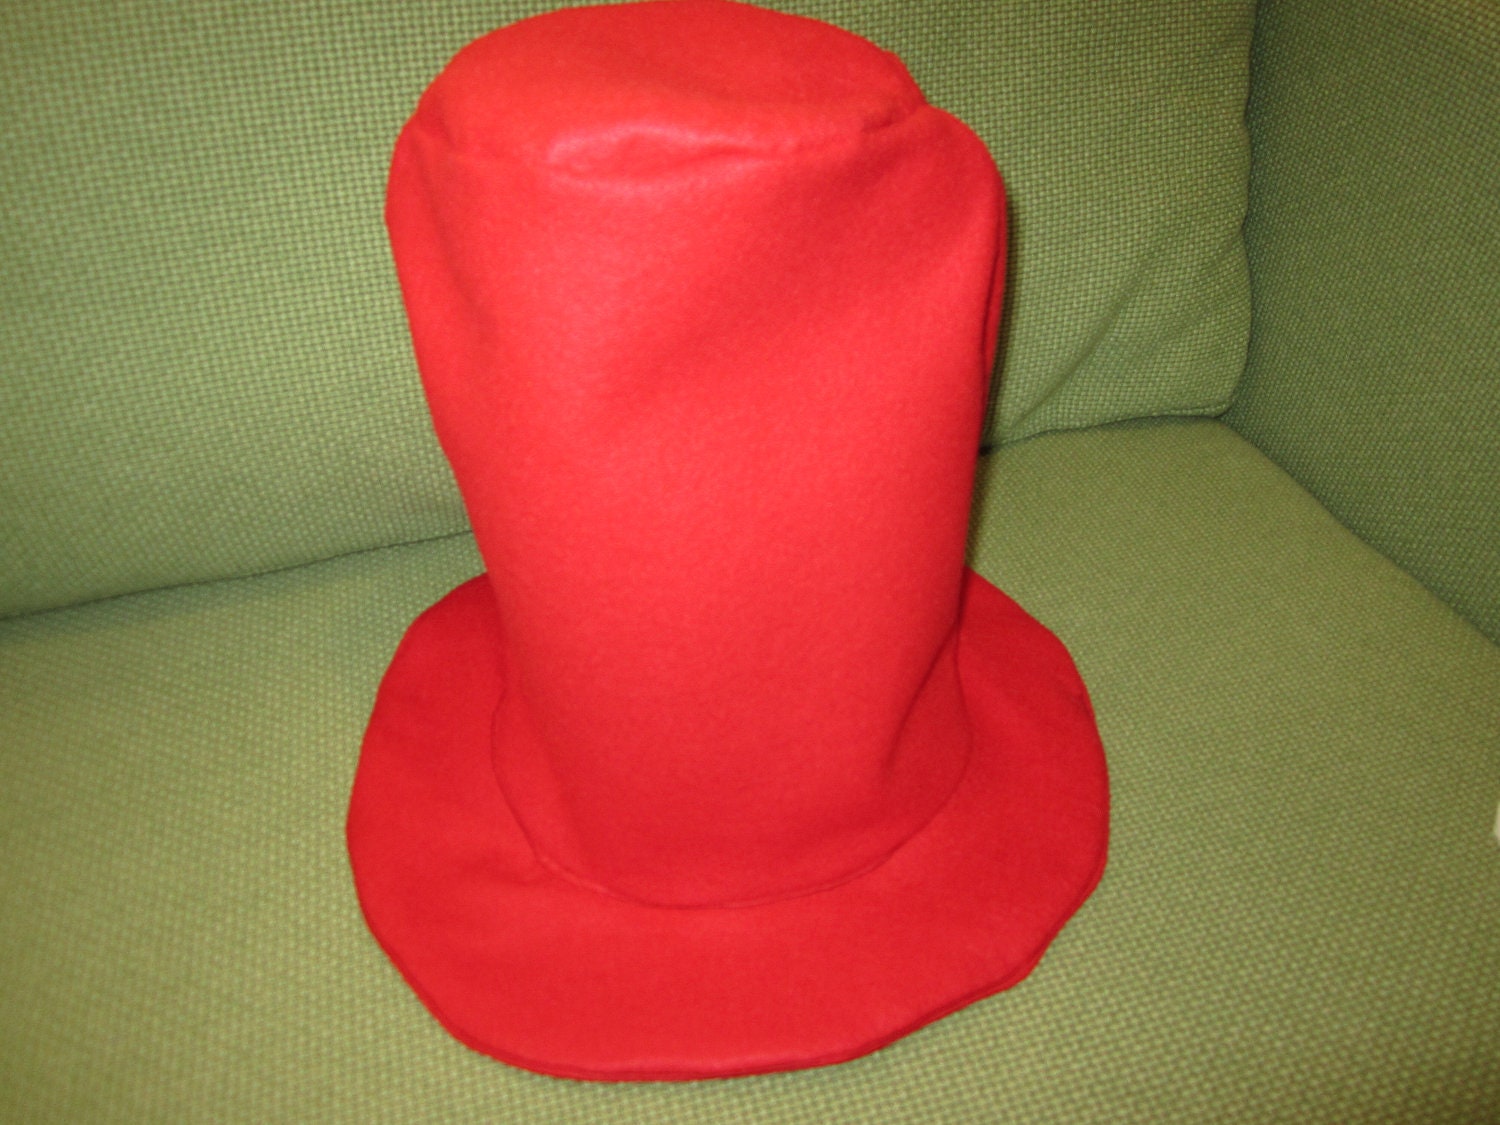 sam-i-am-inspired-hat-all-red-dr-seuss-hat